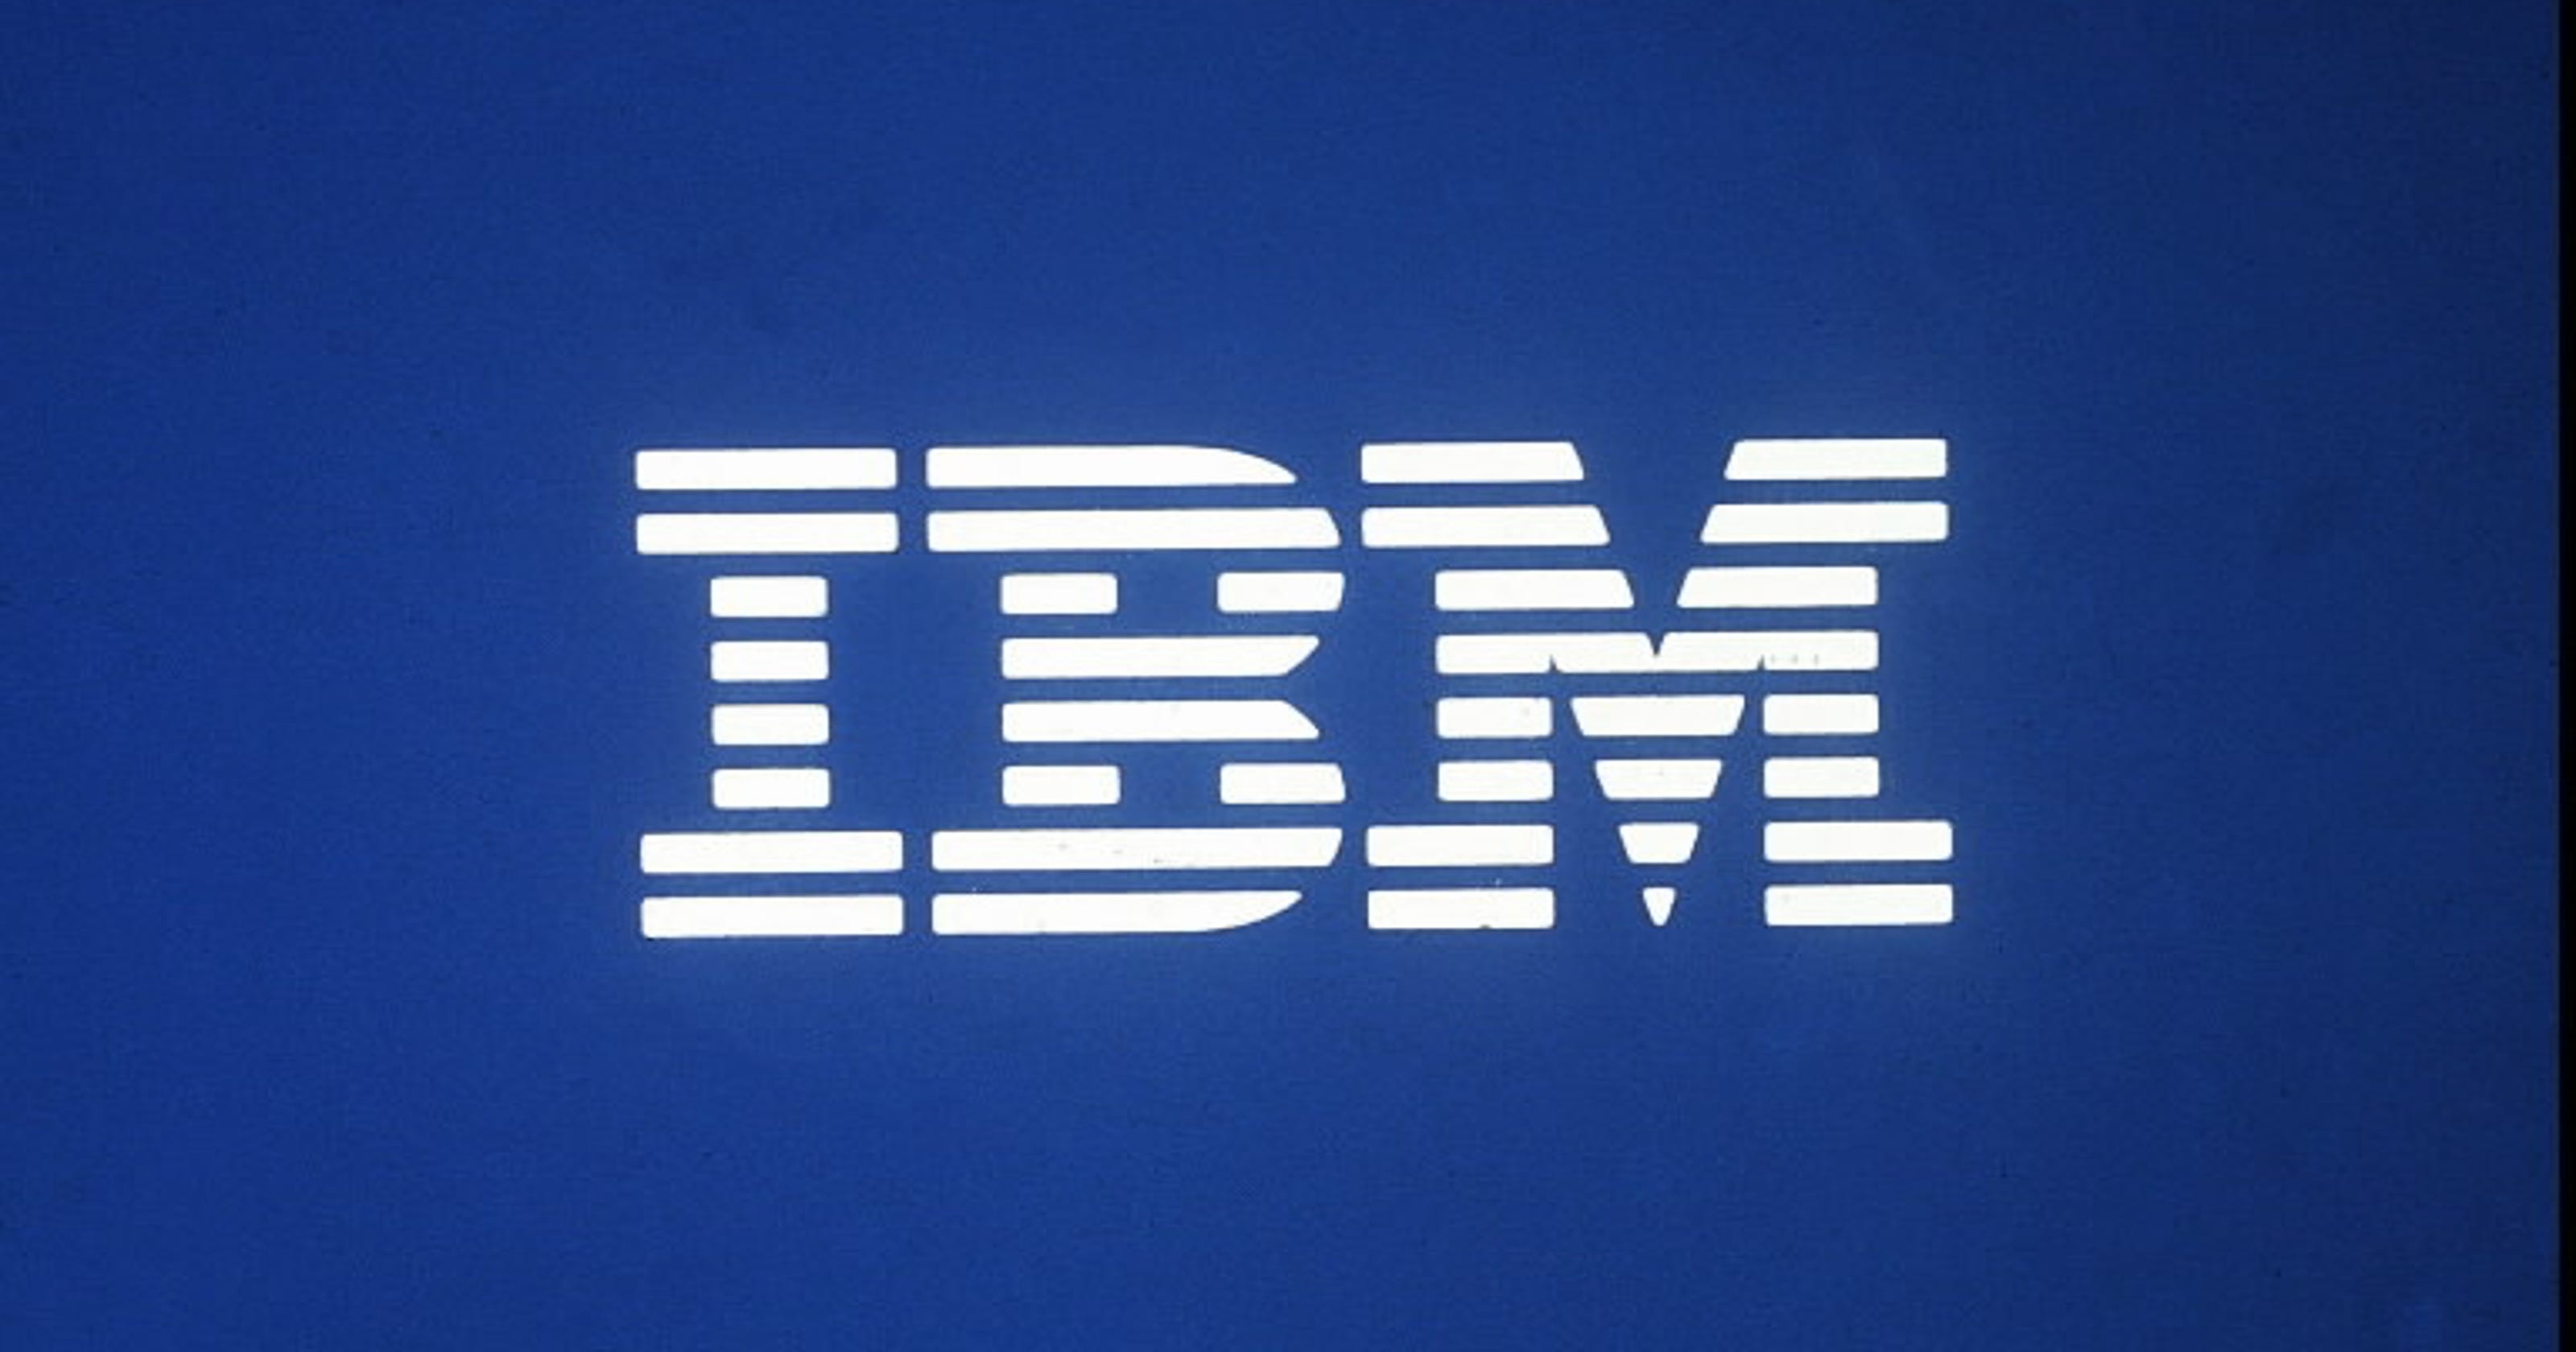 ibm-ceo-other-top-execs-give-up-2013-bonuses